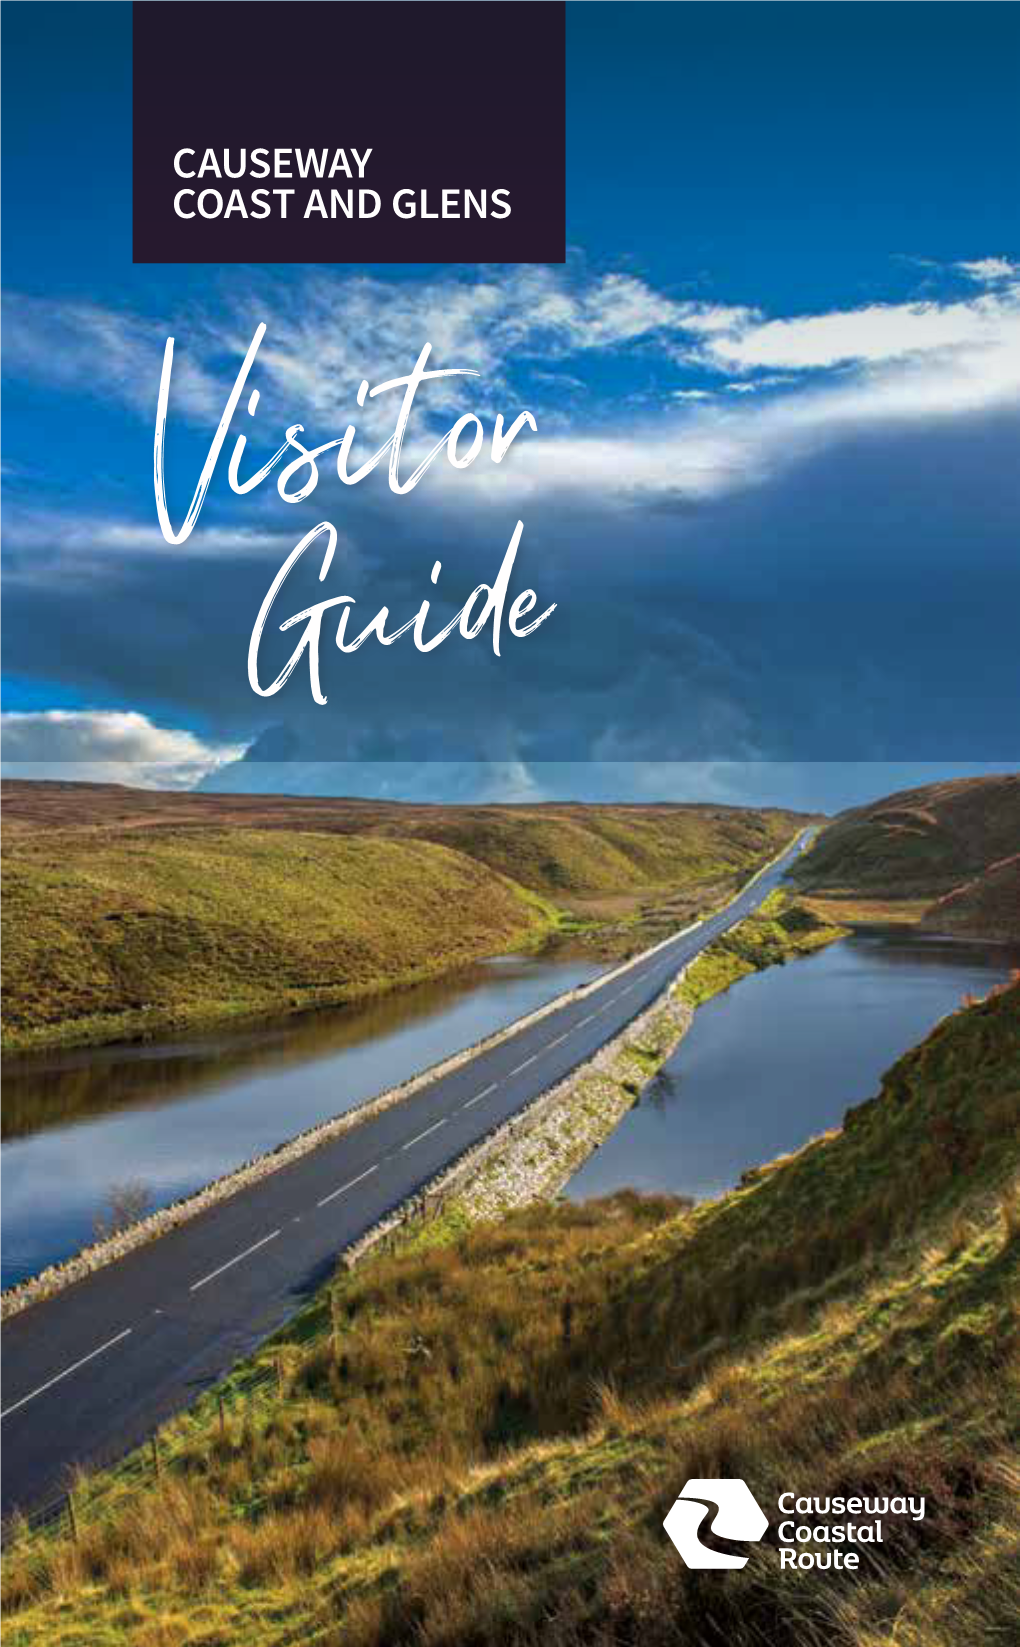 CAUSEWAY COAST and GLENS Visitor Guide Welcometo the CAUSEWAY COAST and GLENS